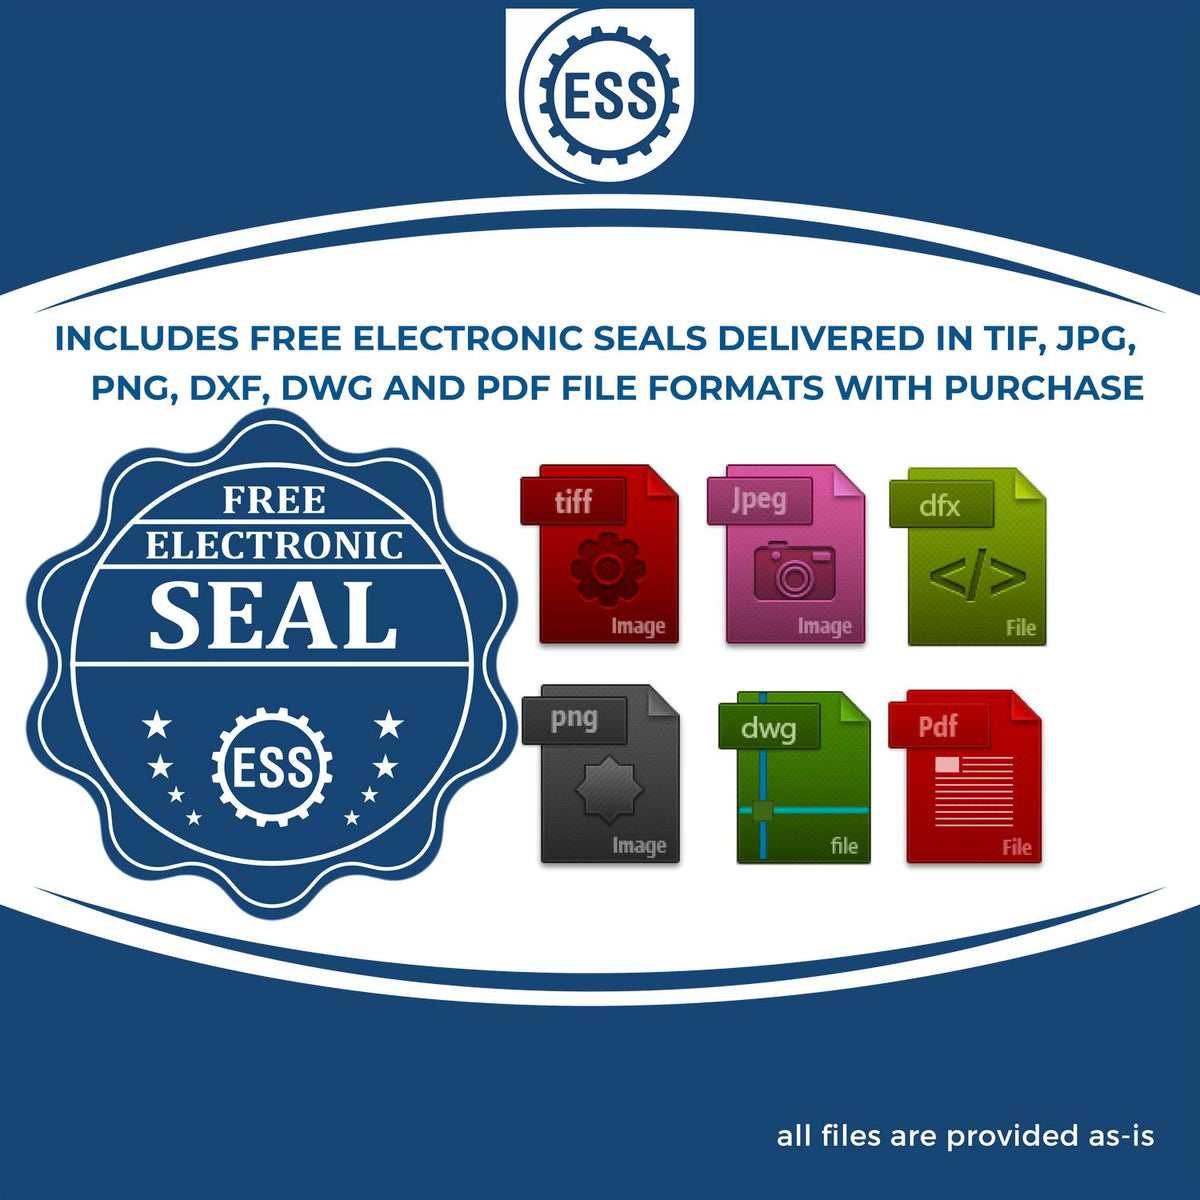 An infographic for the free electronic seal for the Delaware Geologist Desk Seal illustrating the different file type icons such as DXF, DWG, TIF, JPG and PNG.